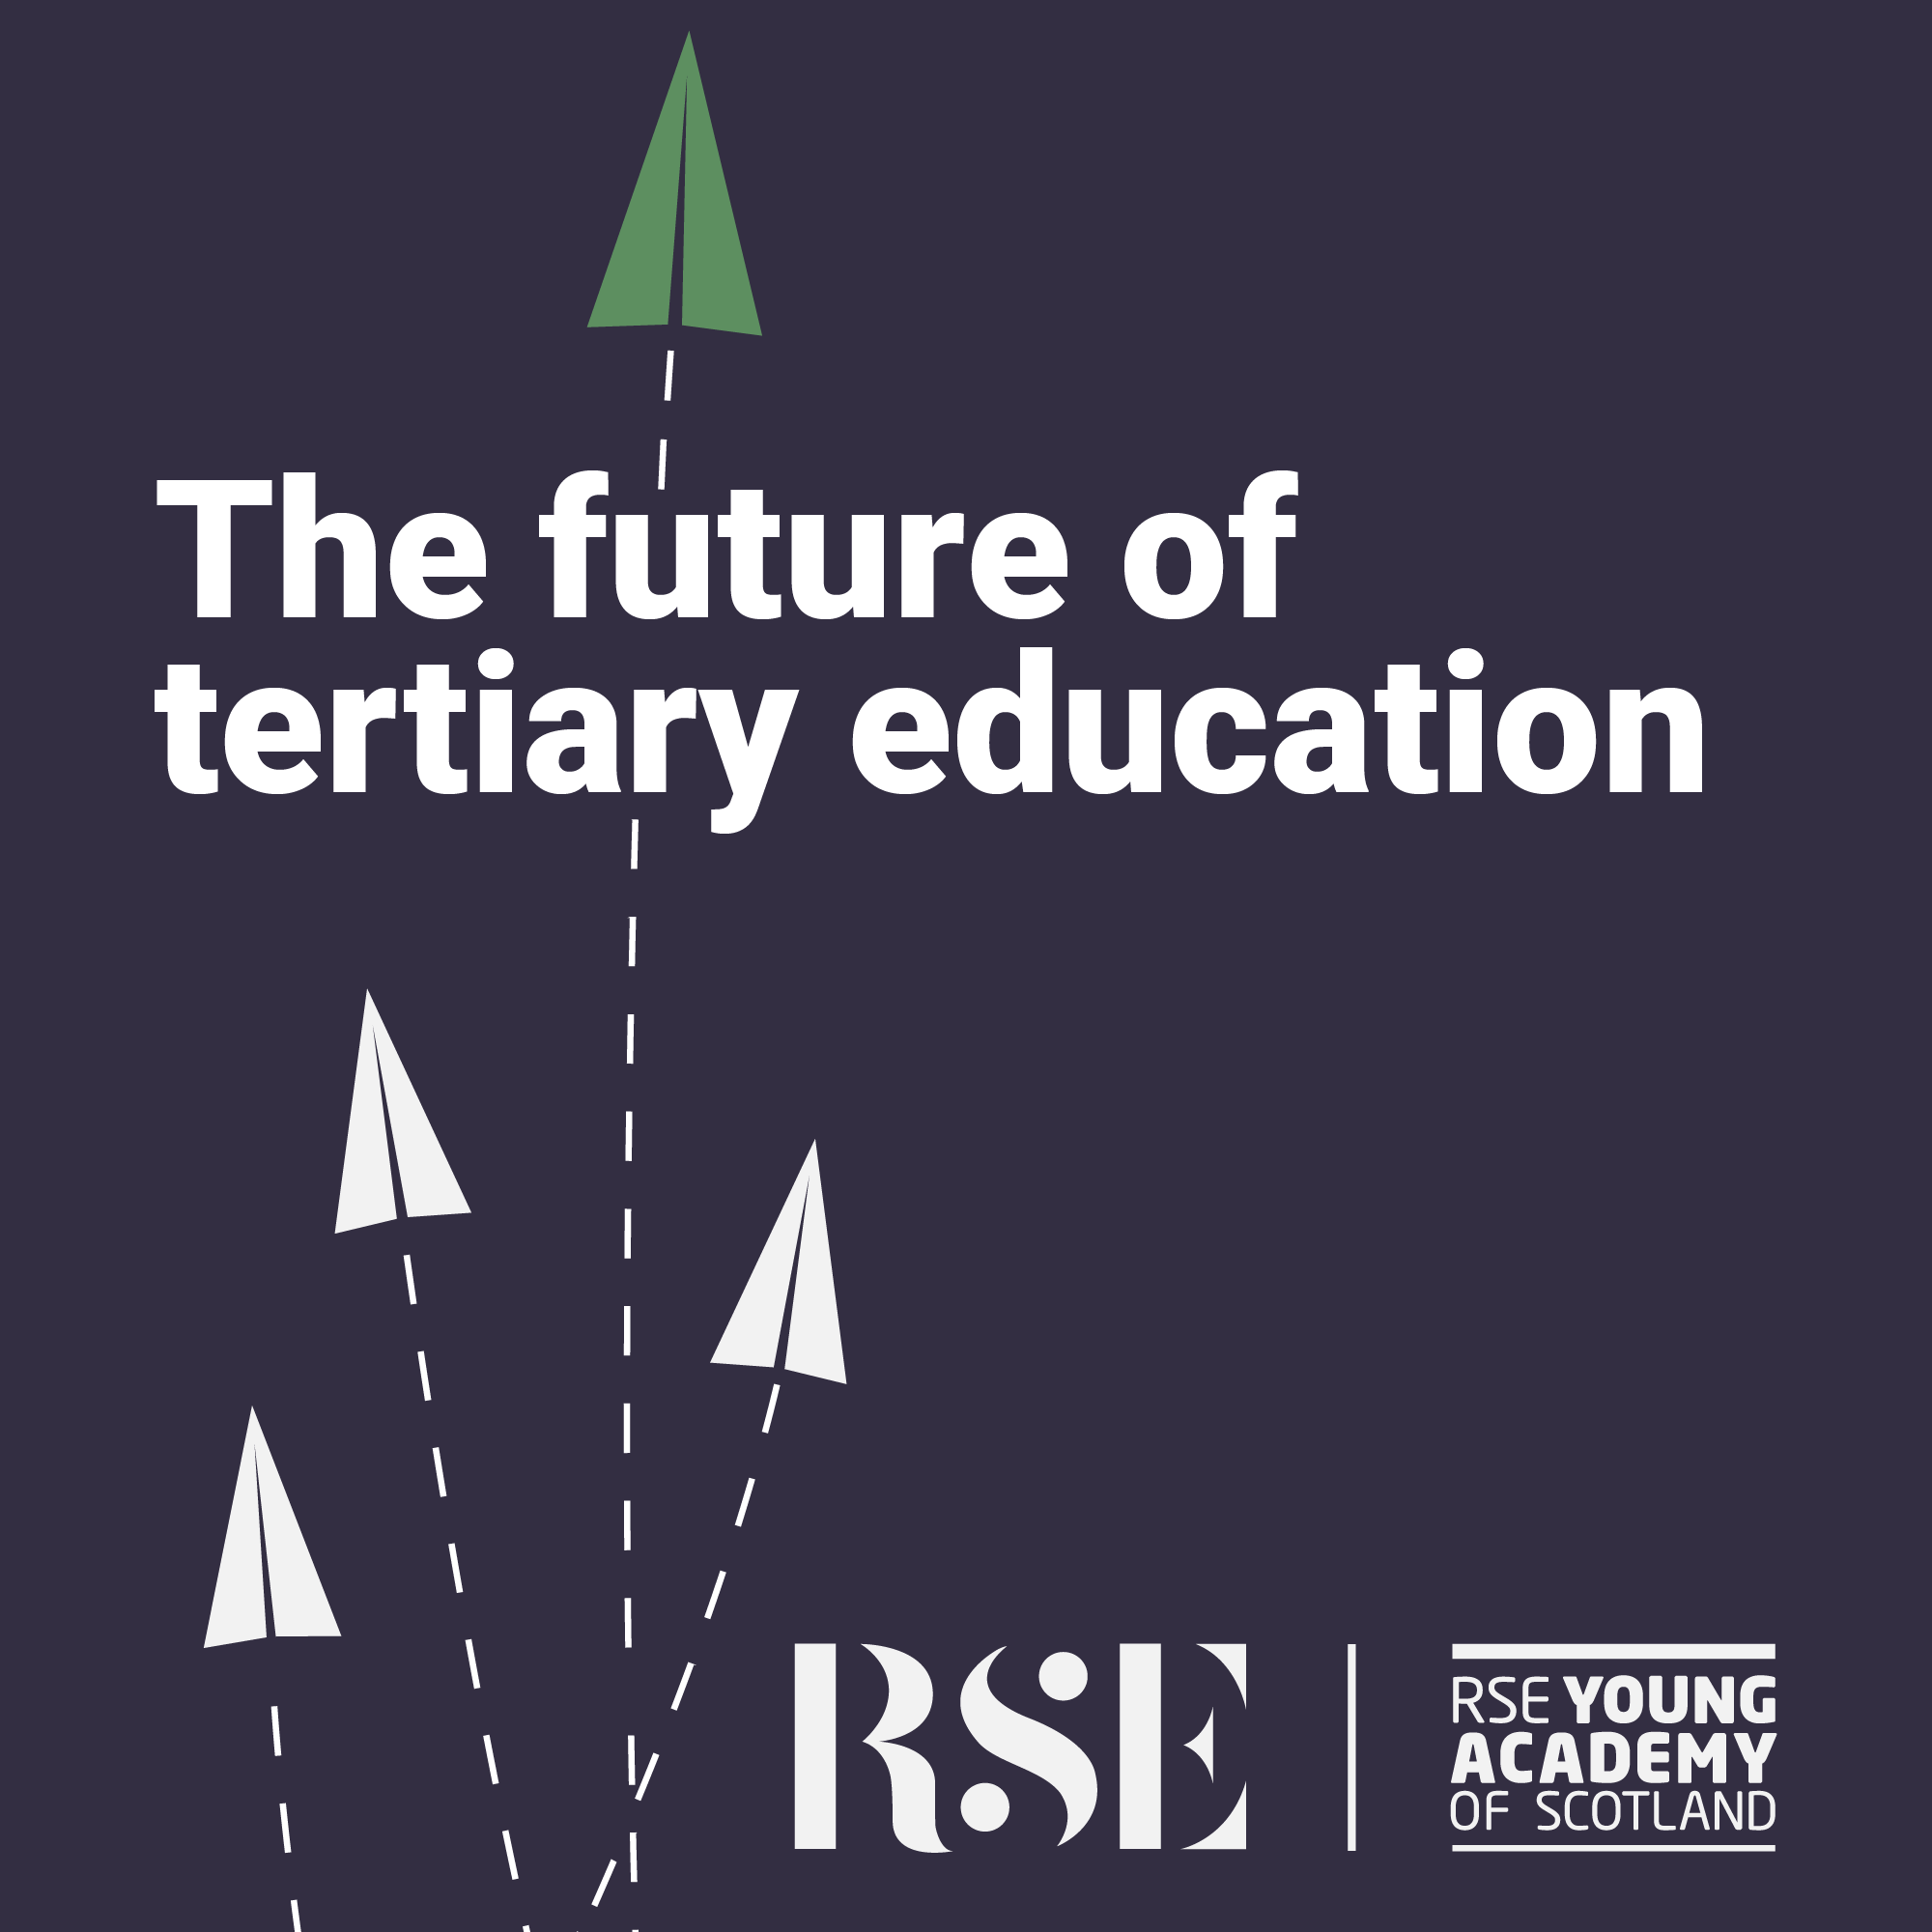 The future of tertiary education